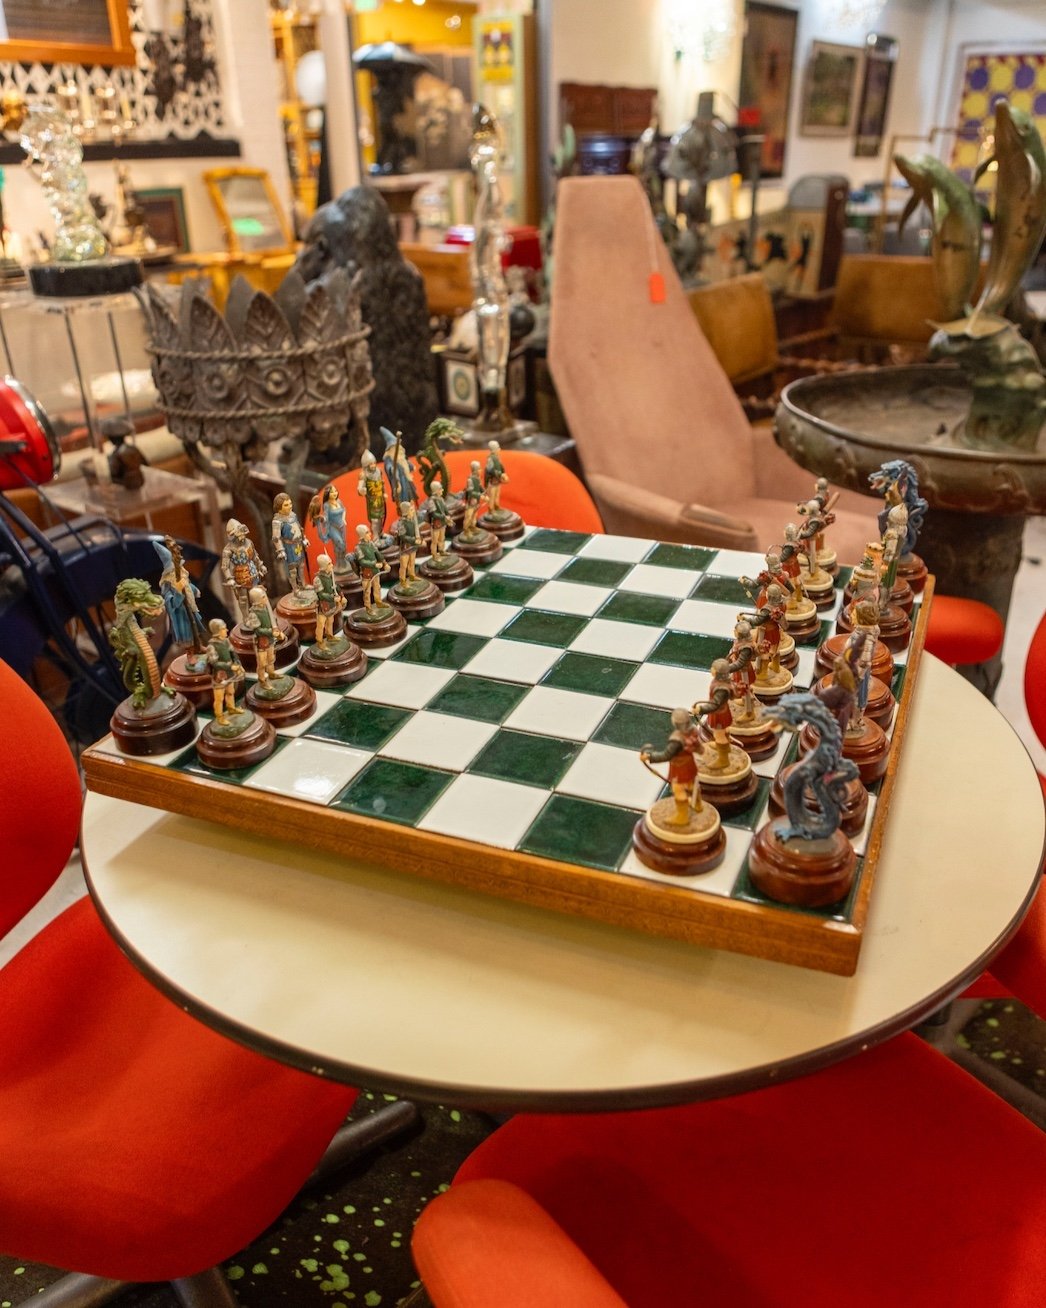 Your move! ♟️We are loving this unique #vintage fantasy-themed #ChessSet. Come visit us every day from 10am-6pm to check out everything that our vendors have gotten in recently!⠀
⠀
#PasadenaAntiqueCenter #ShopAntiques #VintageFinds